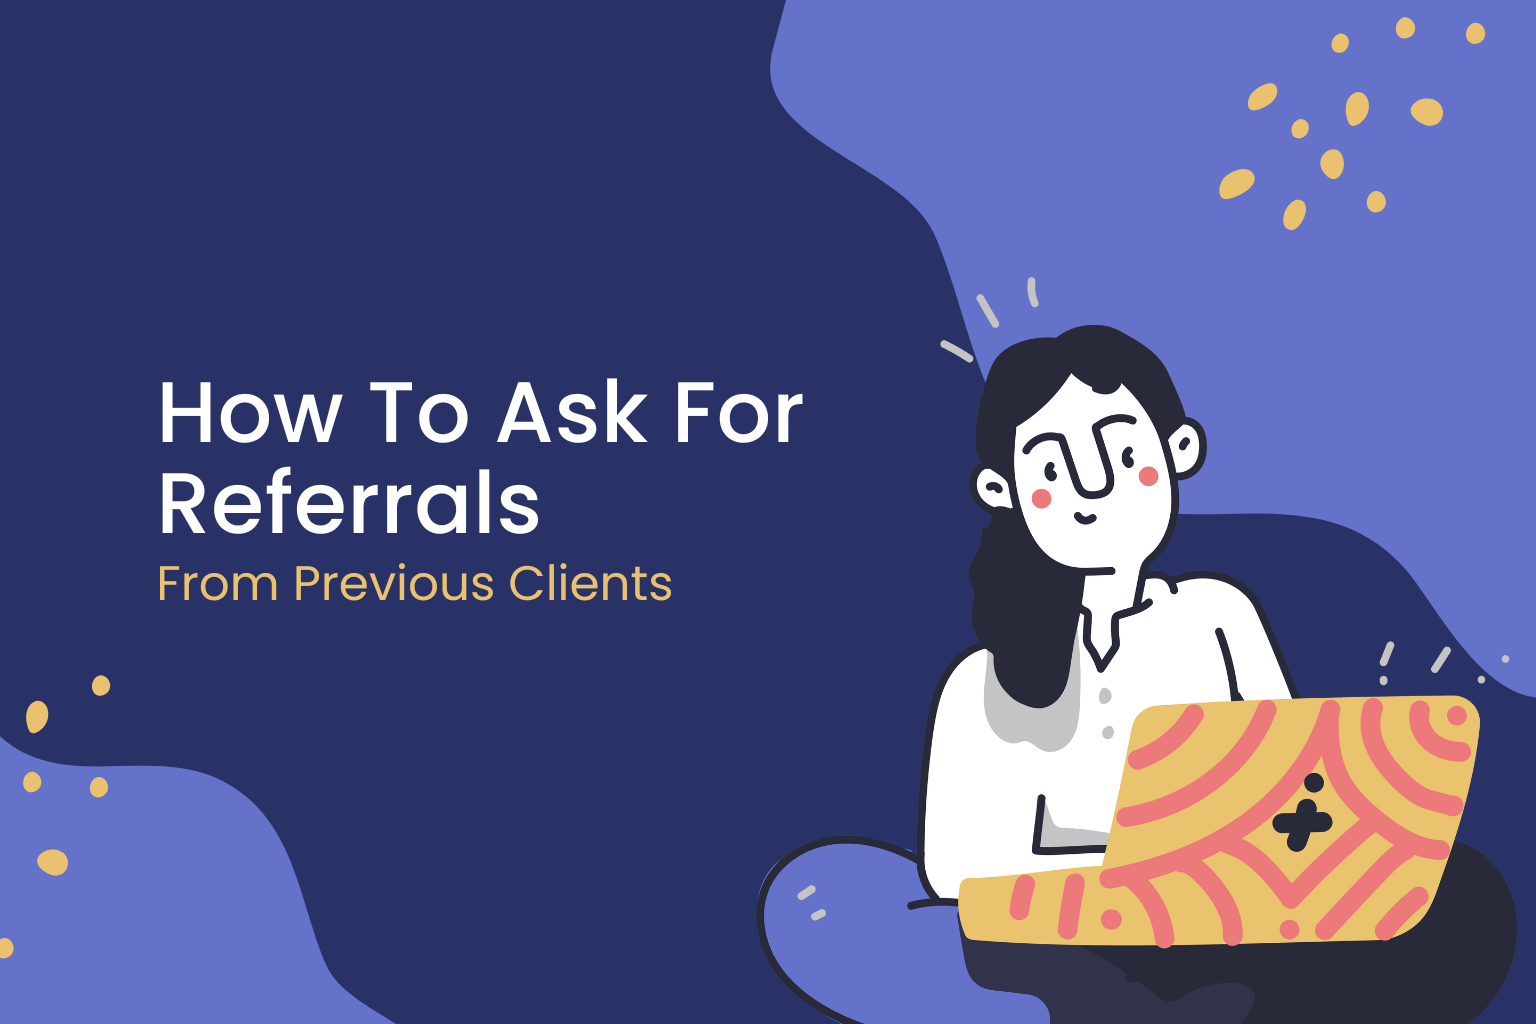 How To Ask For Referrals From Previous Clients